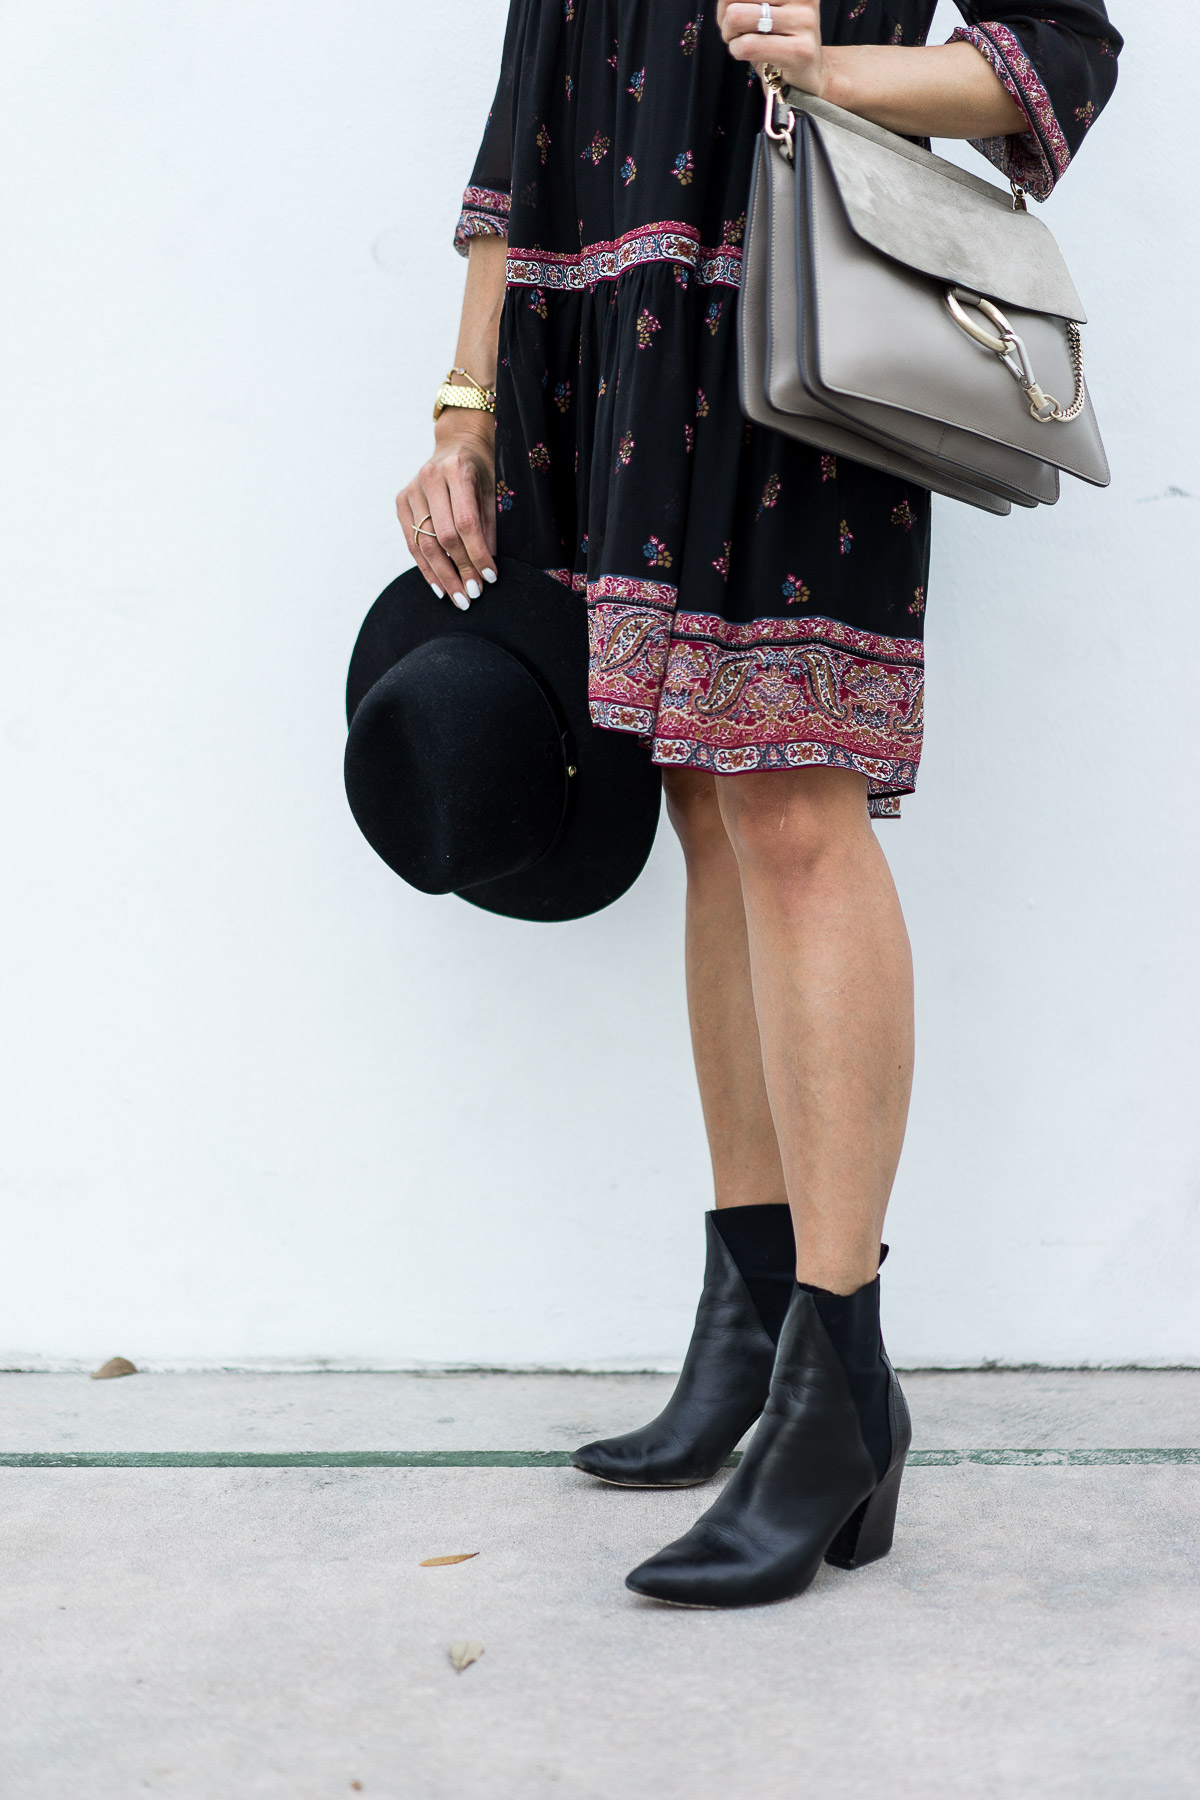 Amanda from A Glam Lifestyle blog shares her fave boho midi dress - the Joie Alpina dress - and accessorizes with ASKA Troy Booties and Chloe Faye bag